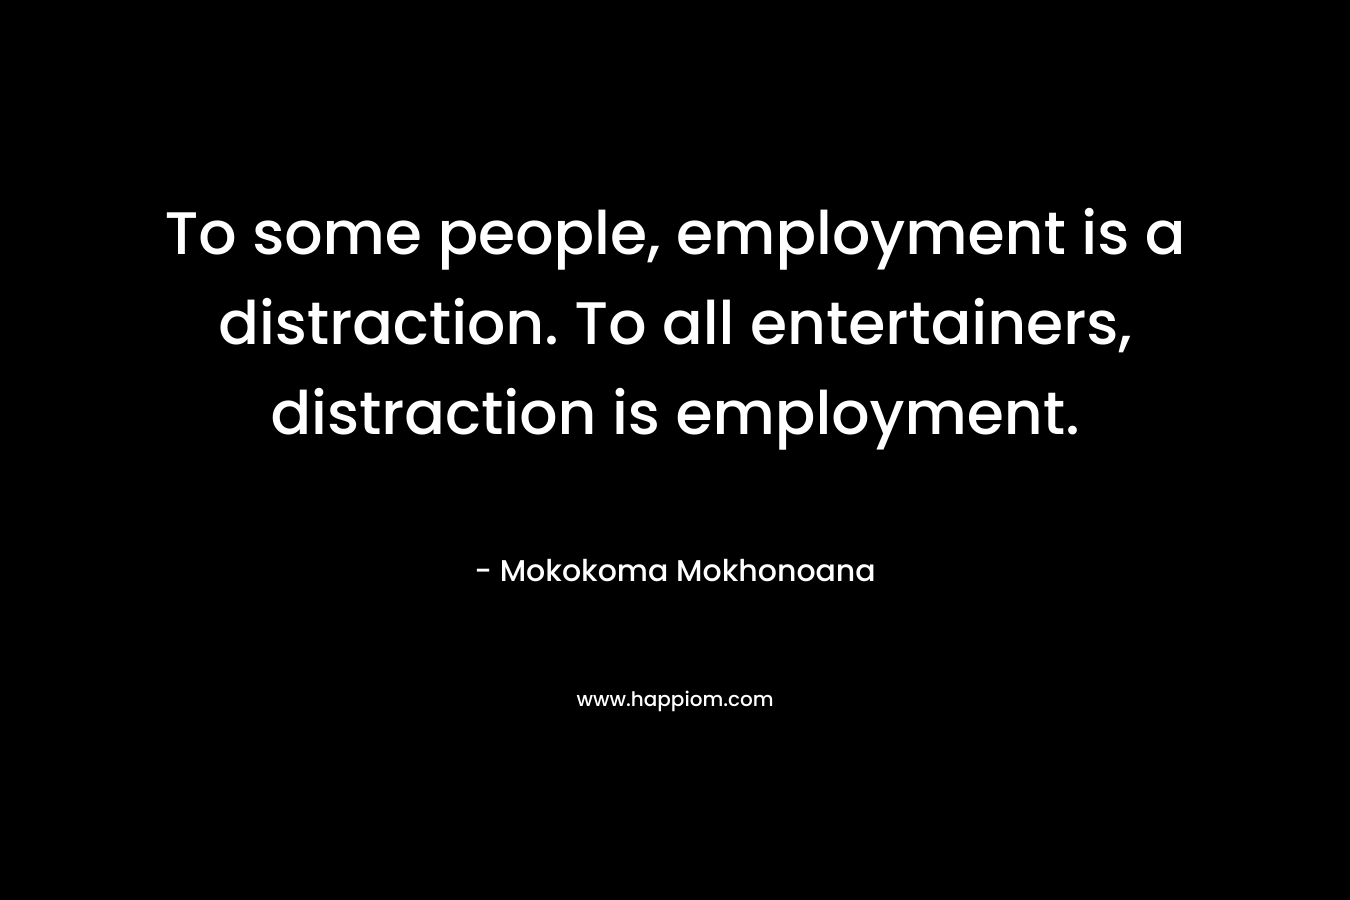 To some people, employment is a distraction. To all entertainers, distraction is employment. – Mokokoma Mokhonoana